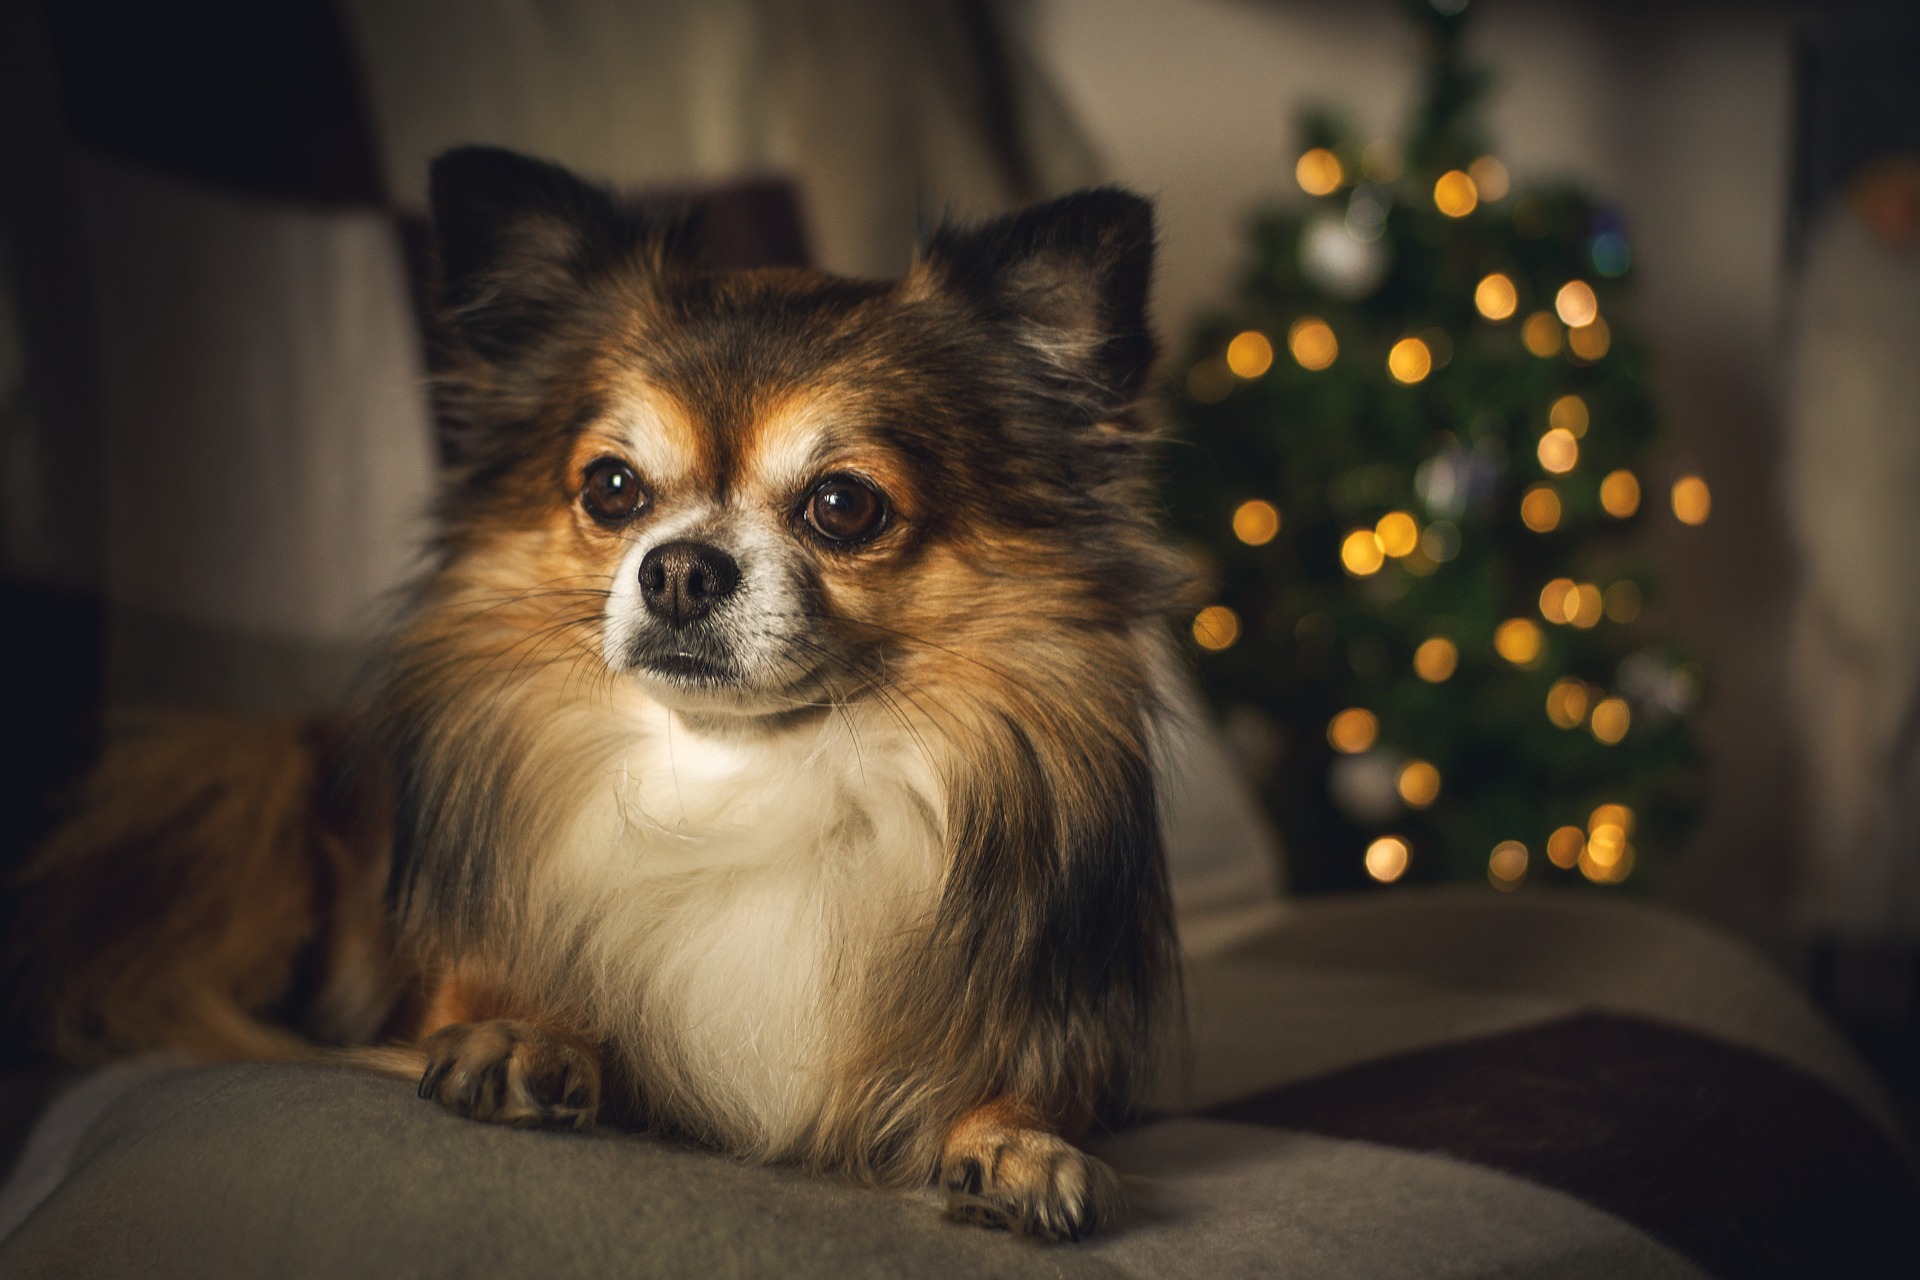 A picture of a Chihuahua dog in front of a Christmas tree